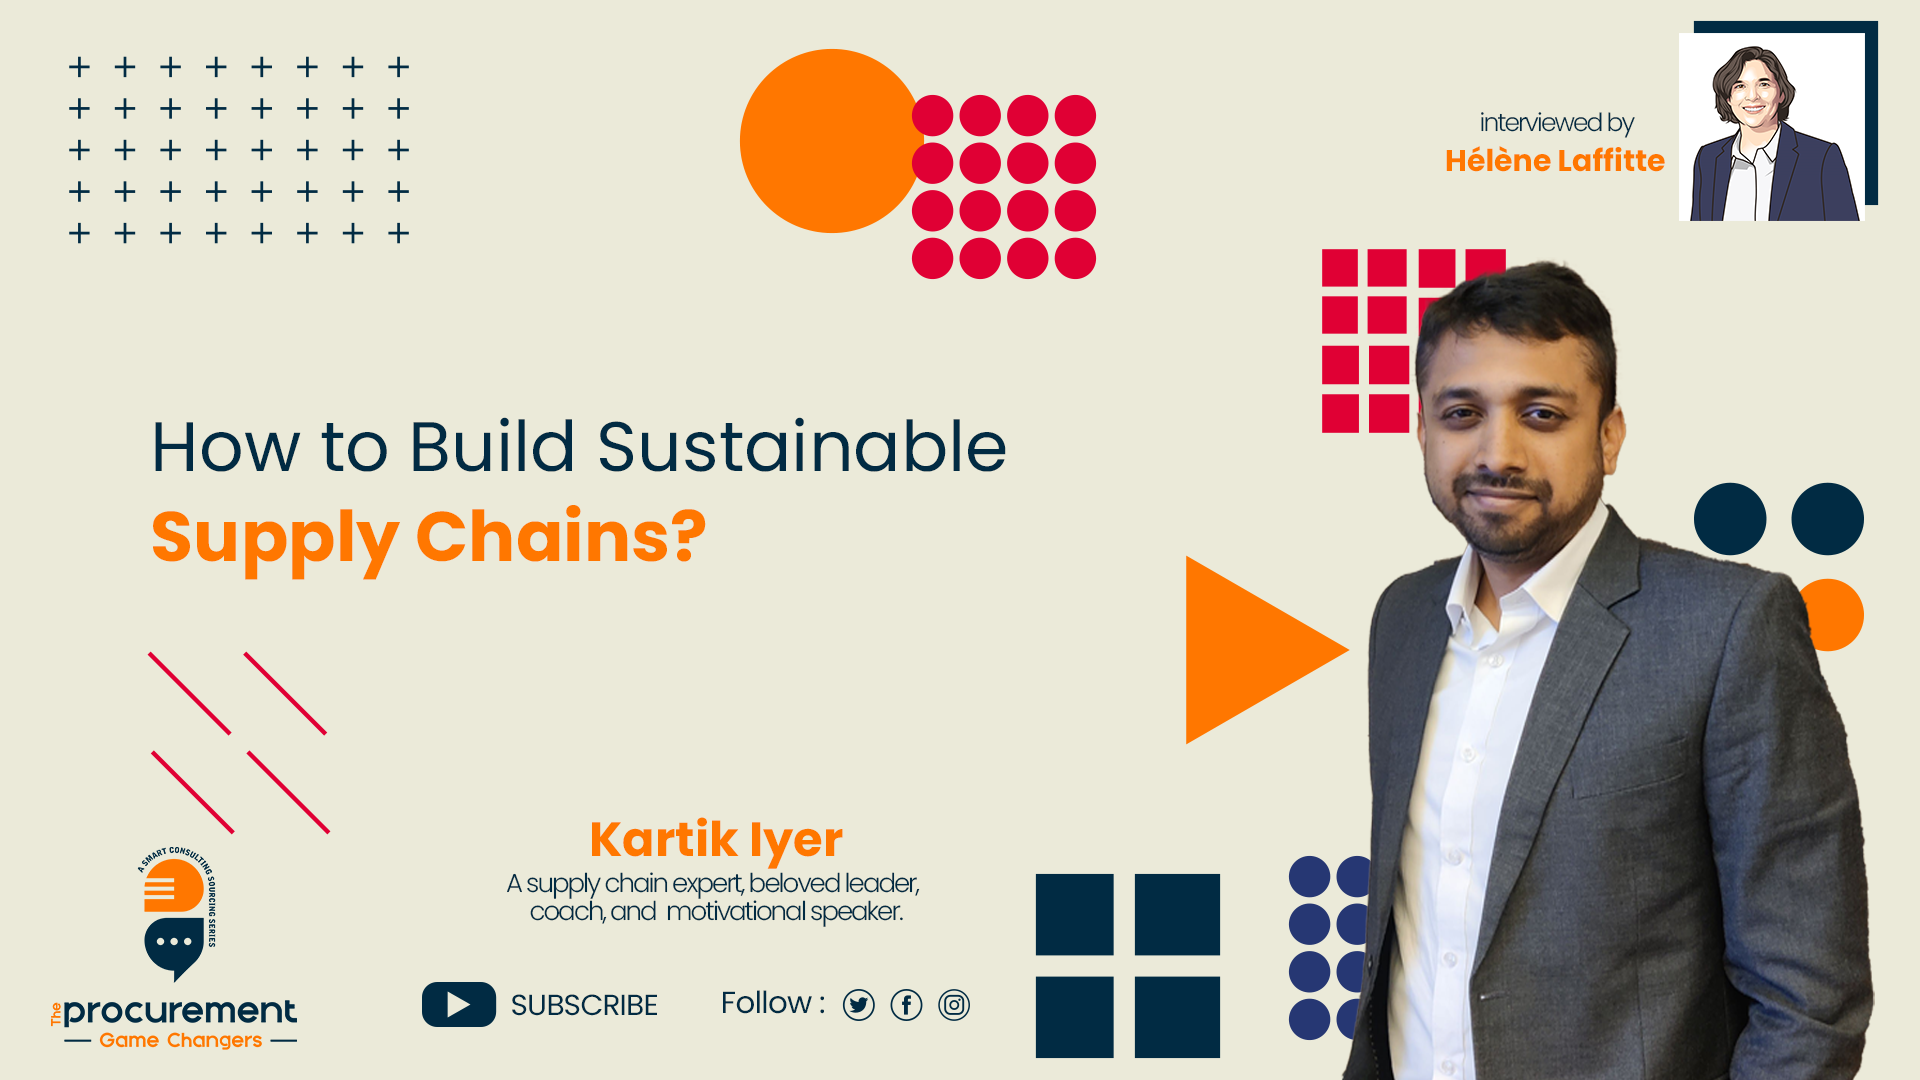 How to Build Sustainable Supply Chains?